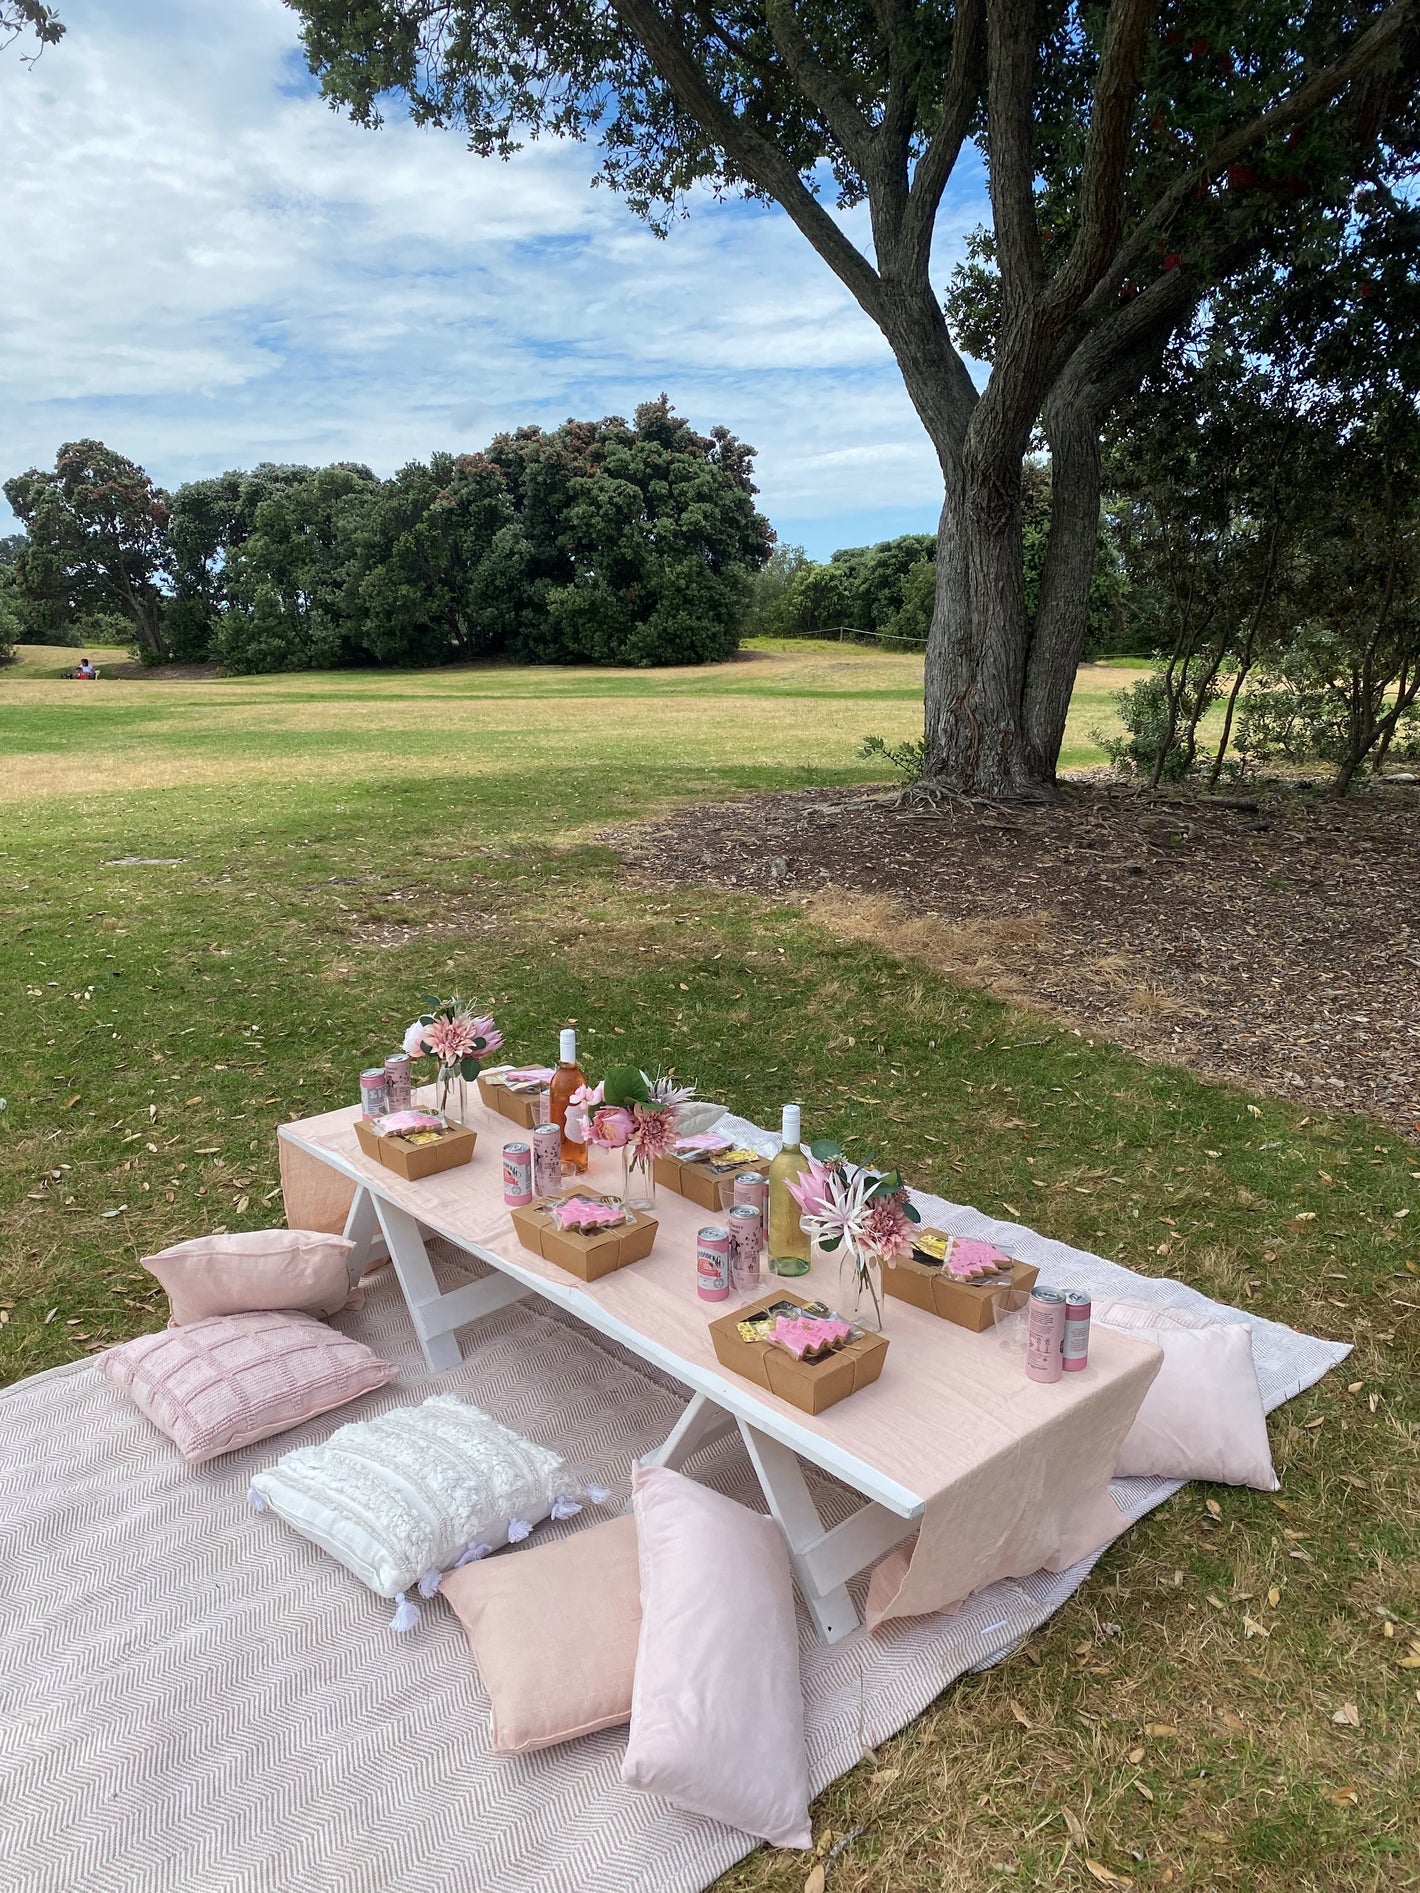 Pretty in pink low picnic table with rugs and cushions set up at local park.